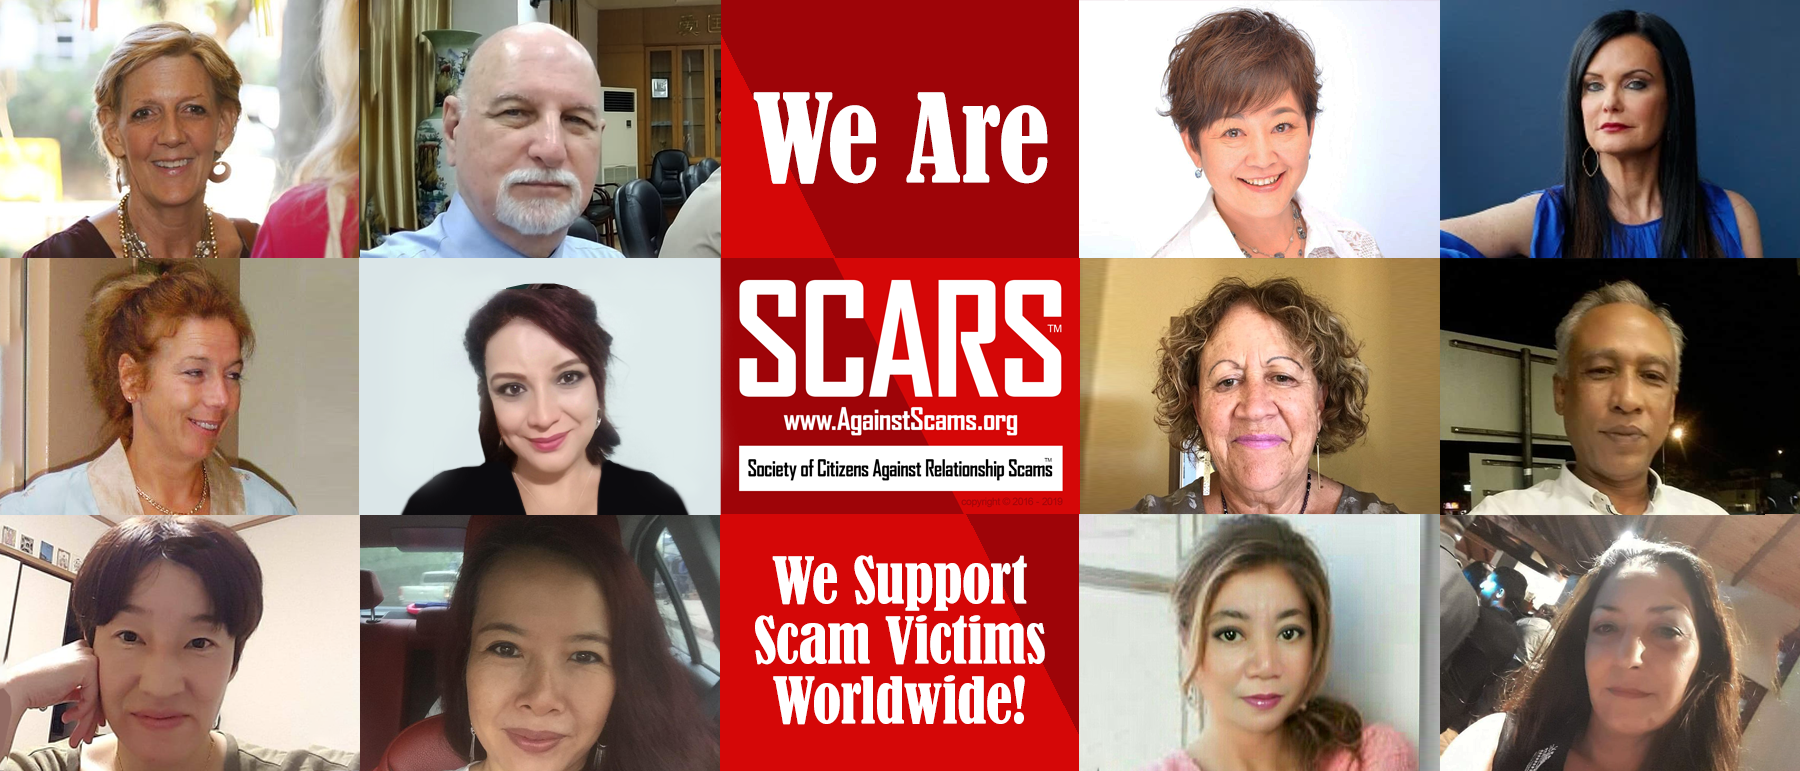 We are SCARS - the Society of Citizens Against Relationship Scams Inc. a  nonprofit crime victims' assistance organization